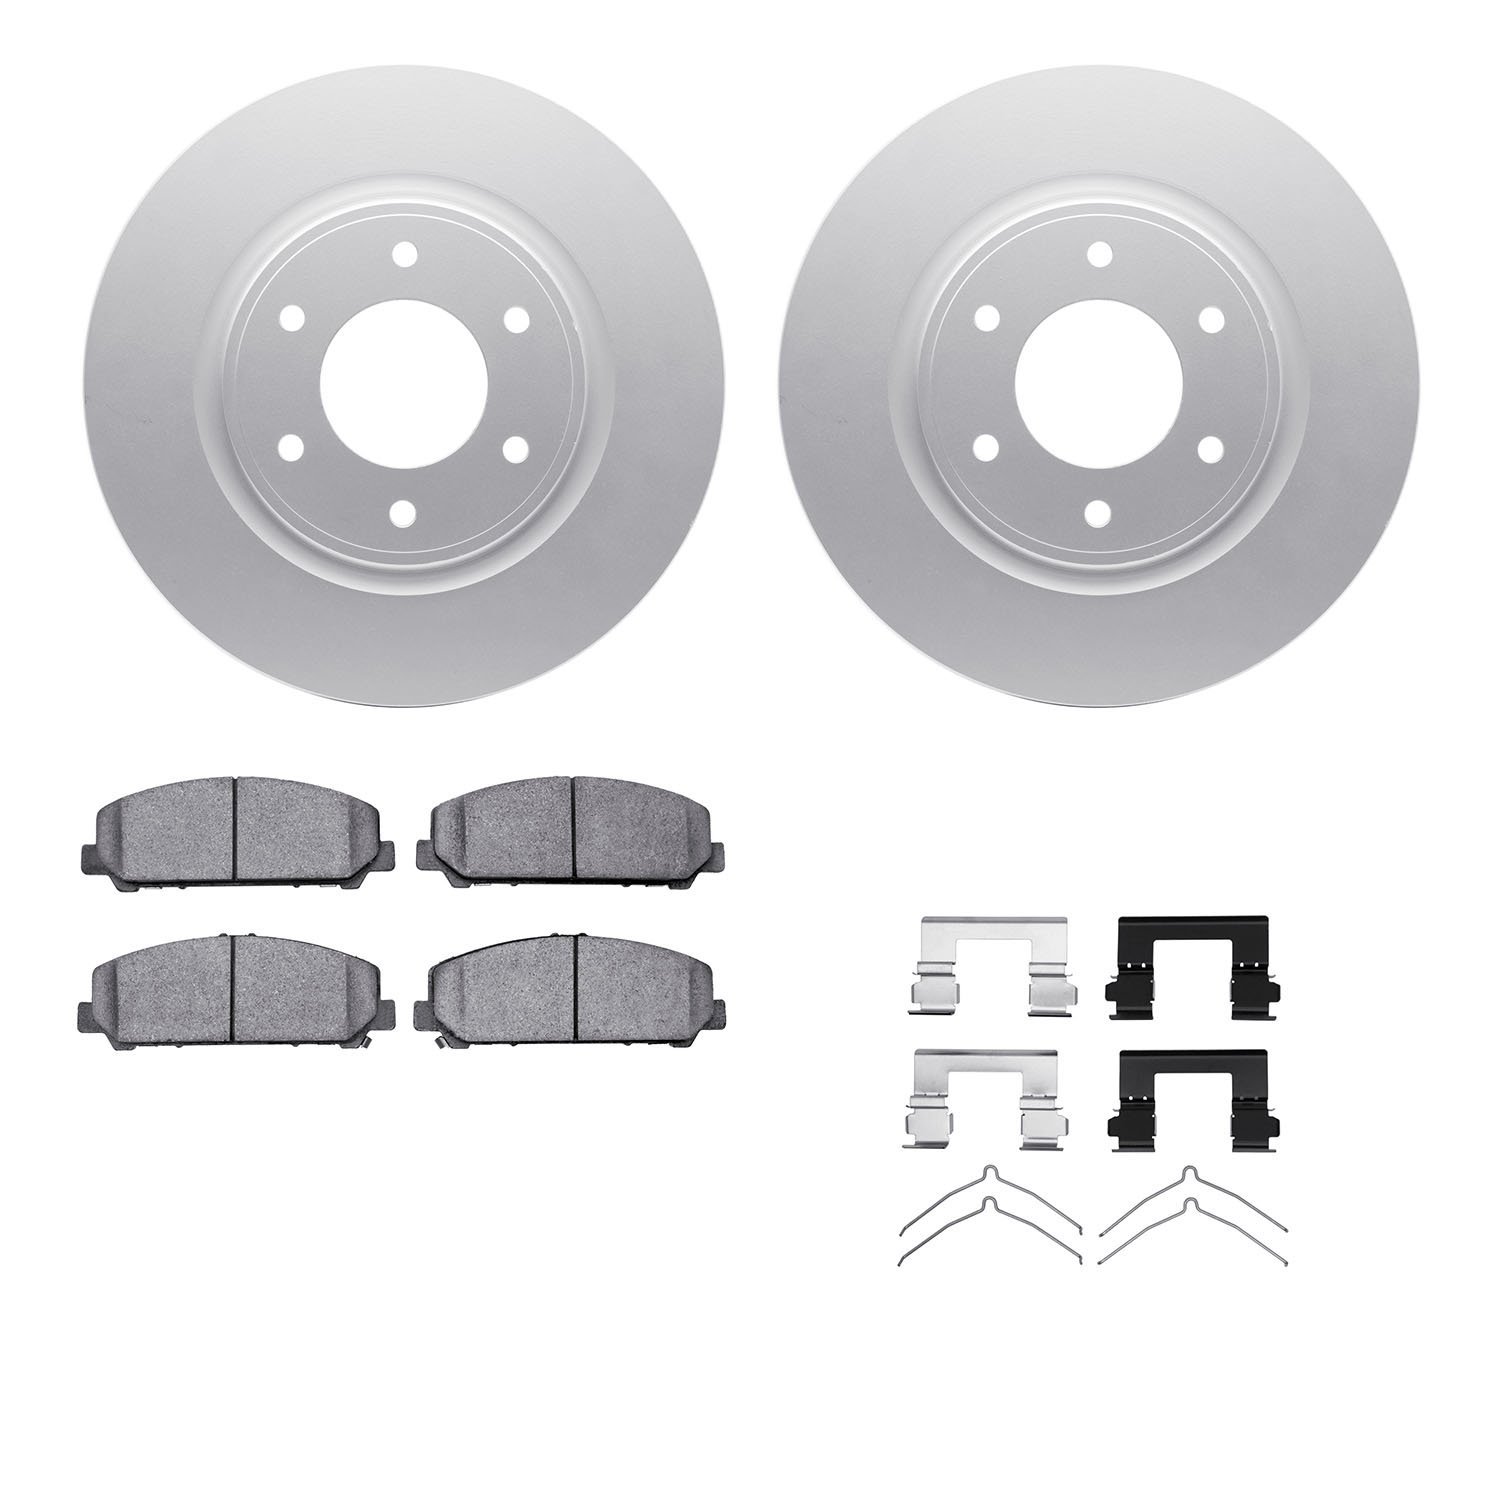 4412-67005 Geospec Brake Rotors with Ultimate-Duty Brake Pads & Hardware, Fits Select Infiniti/Nissan, Position: Front